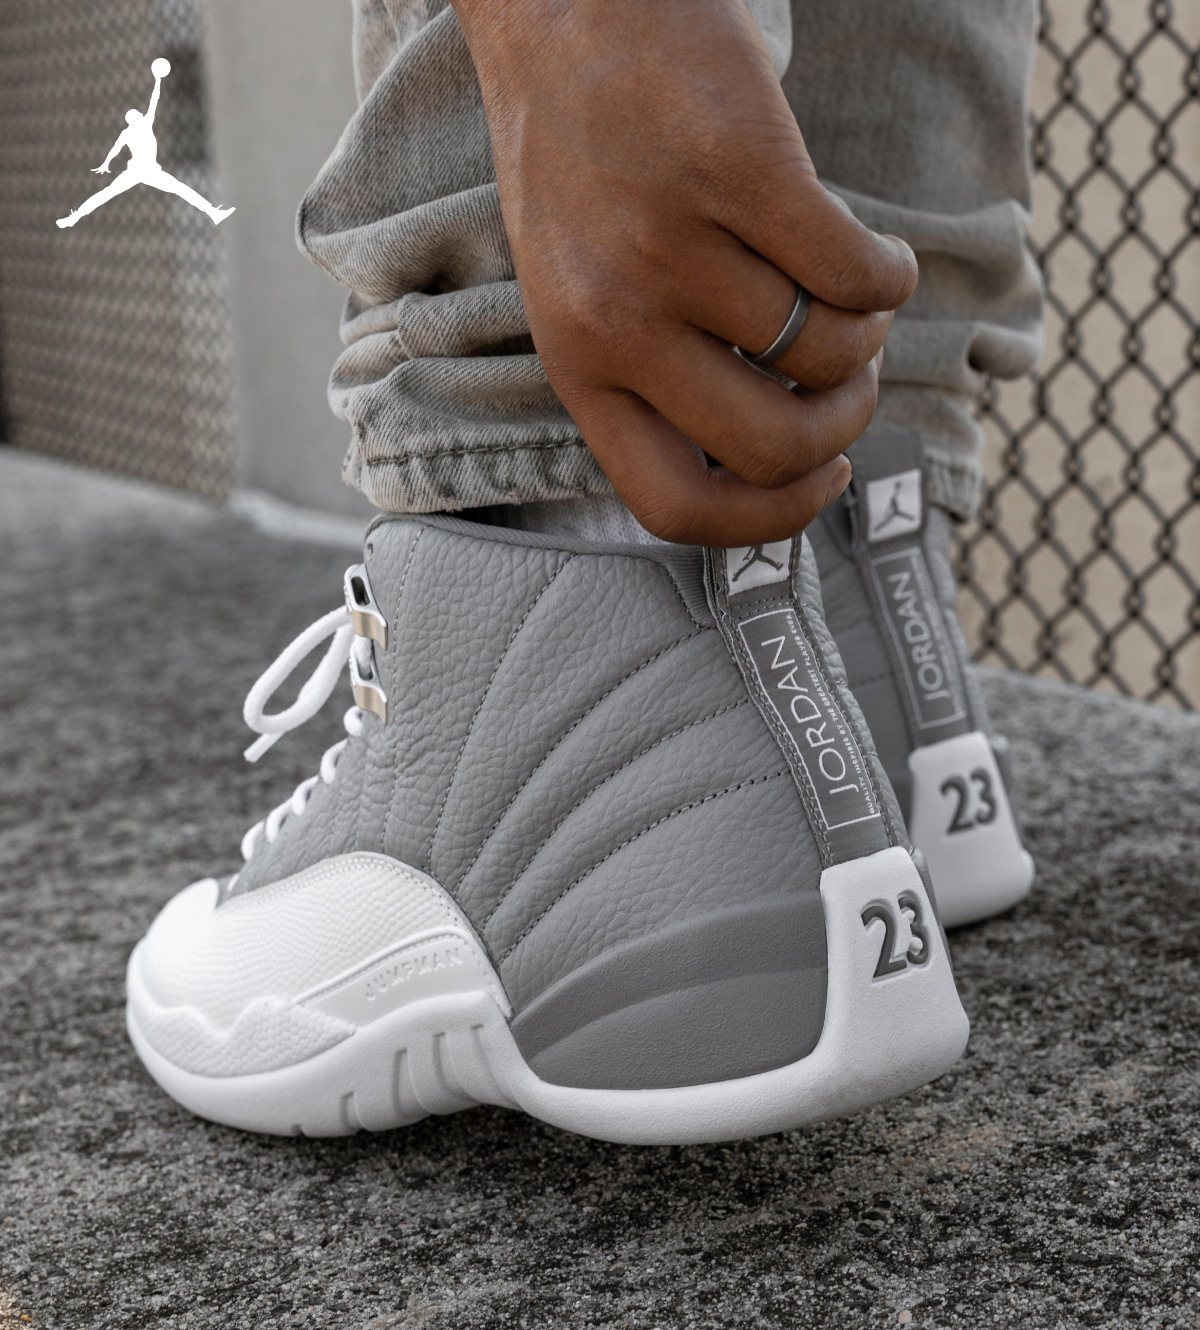 Jimmy Jazz - The Air Jordan 12 Low is back in a new, spring-ready